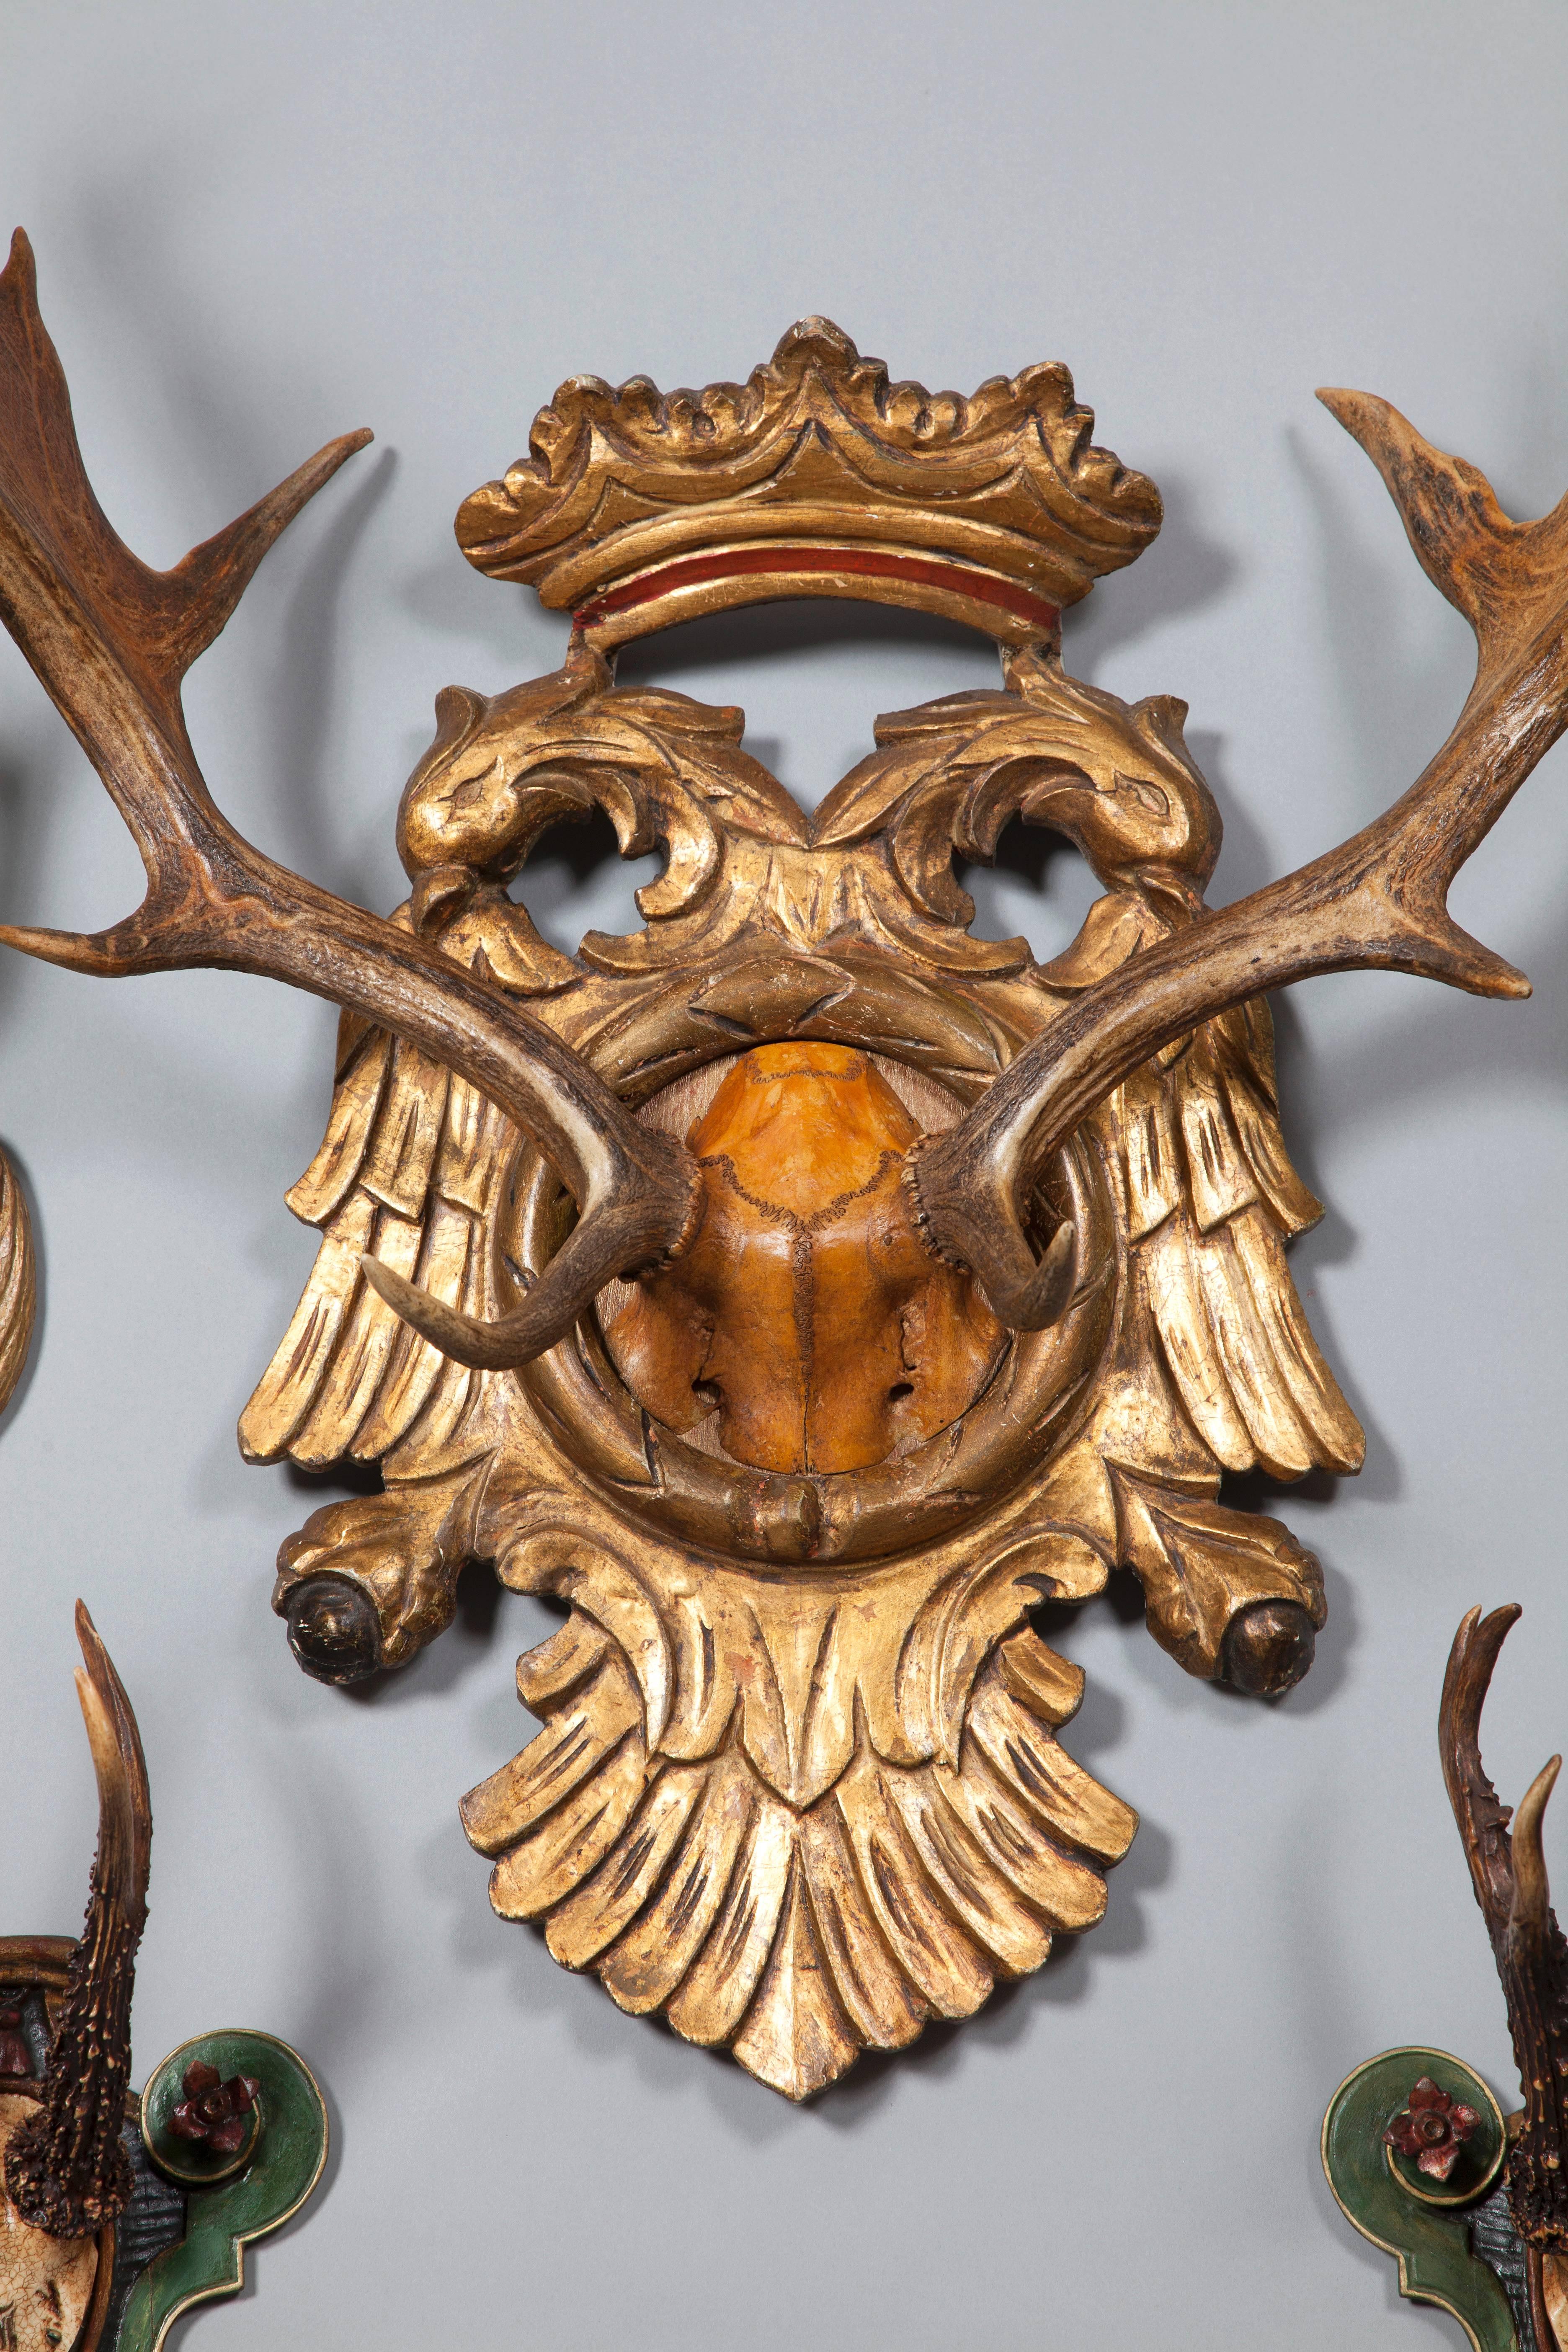 Historic Collection of Hunting Trophies Reputedly from the Personal Collection of Emperor Franz Joseph.

One historic 